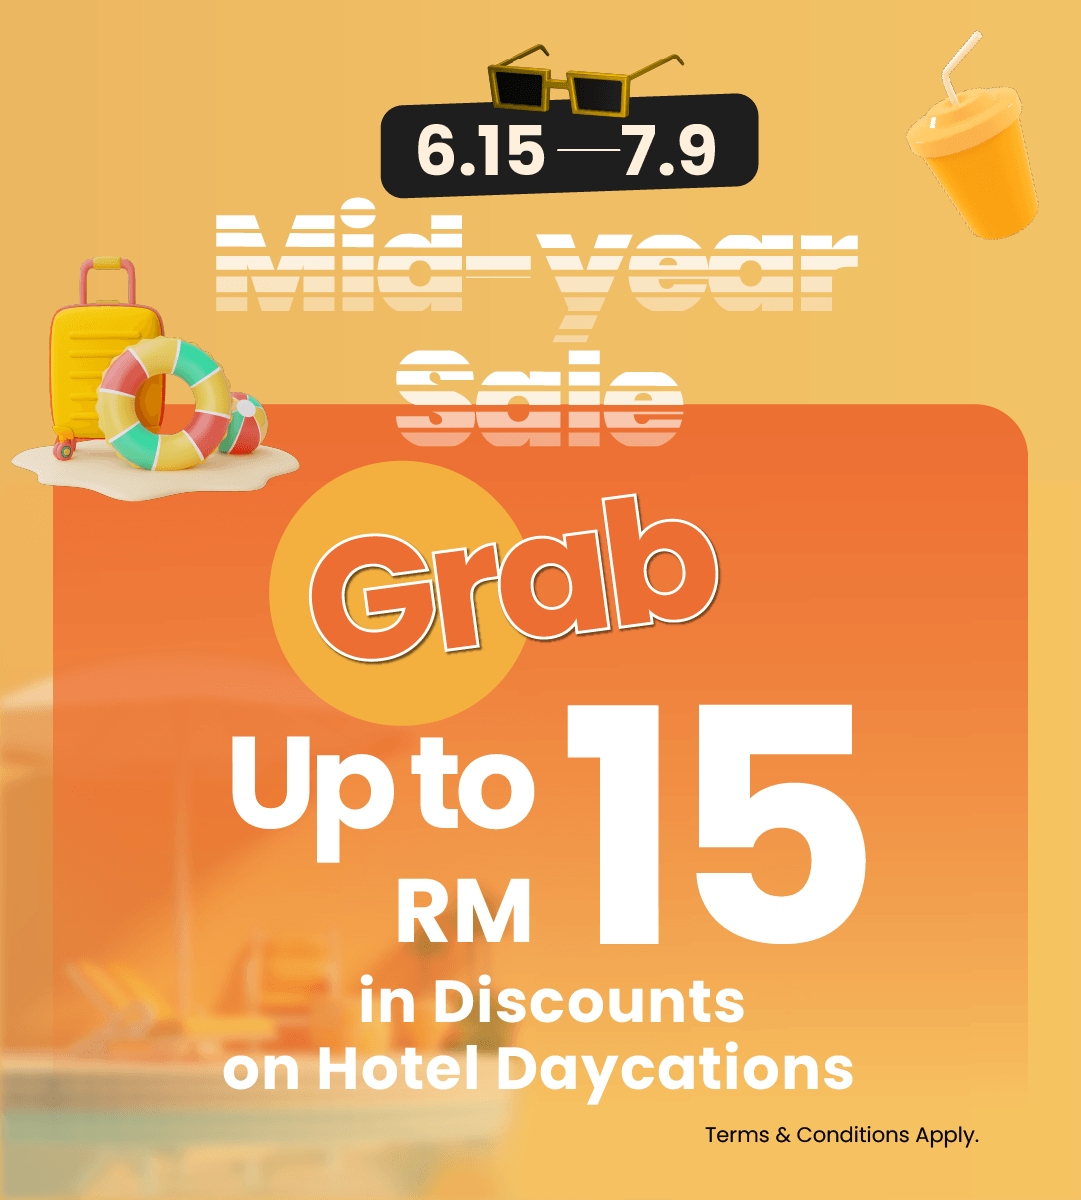 Mid-year Sale: Save big on your Daycation up to RM15